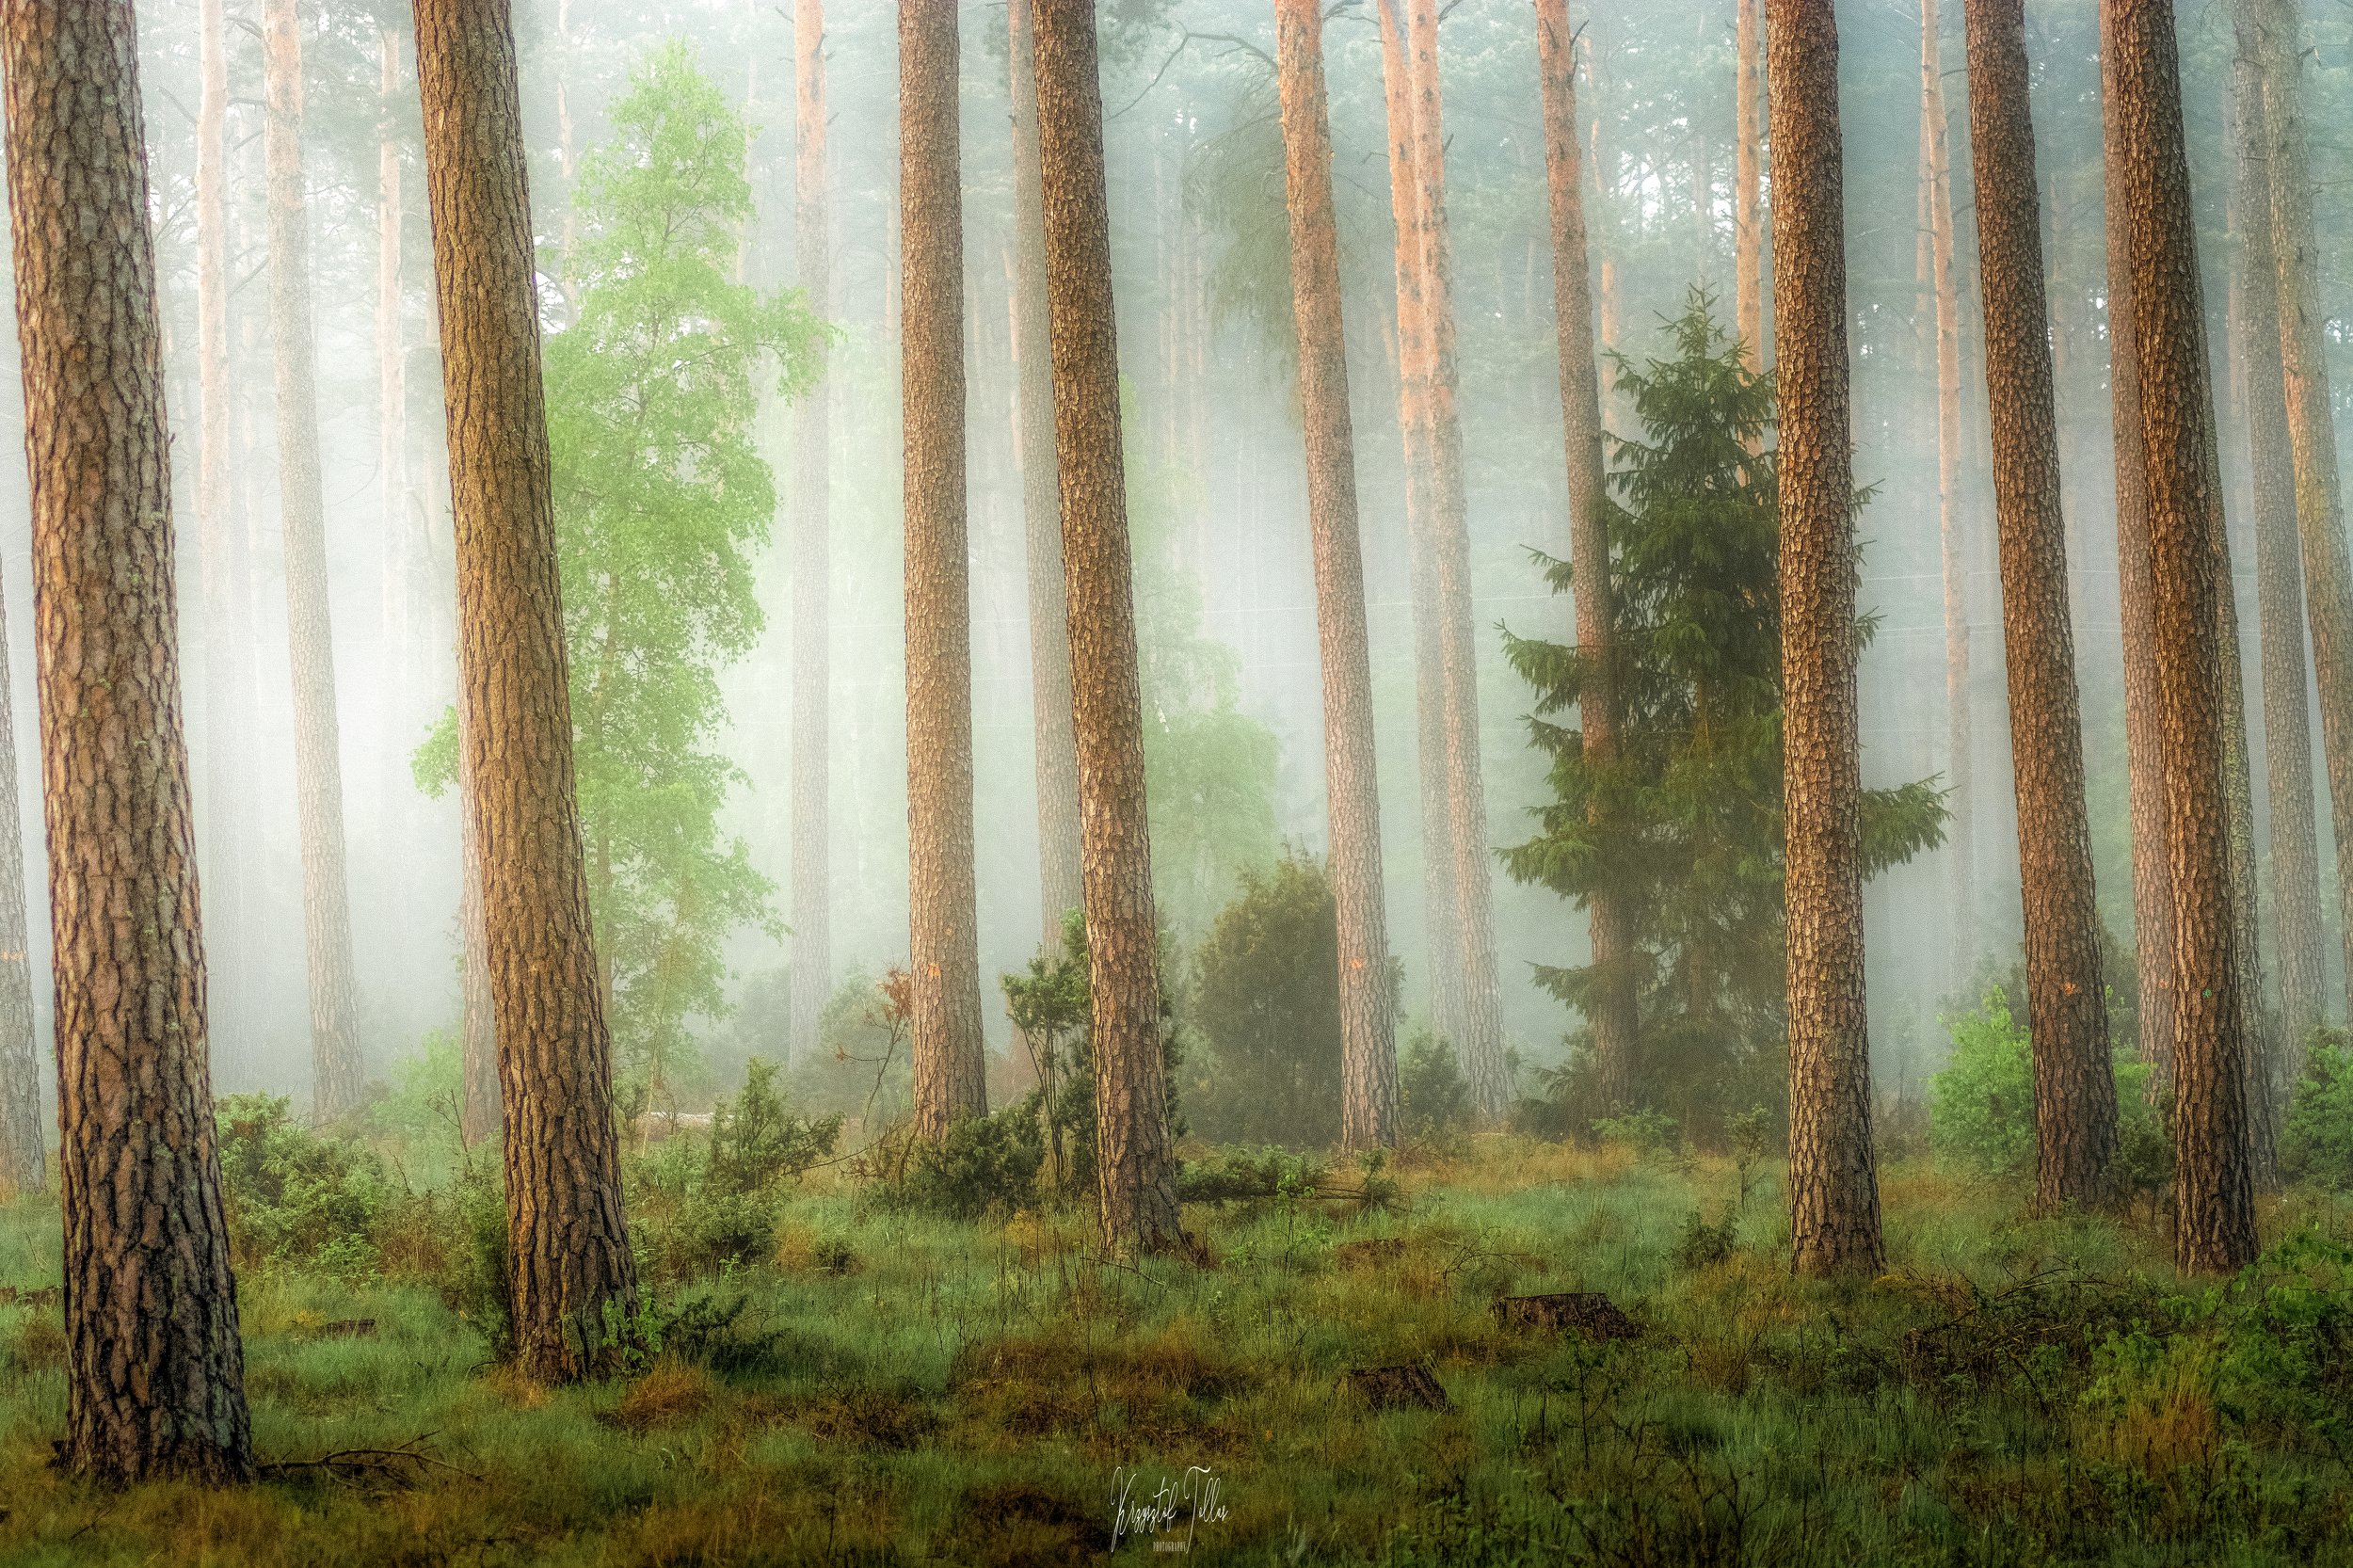 Nature  Forest  Fog  Photography  Woodland  Peaceful Scene  Beauty of nature  Trees  Dawn  Atmosphere  Nikon  Light, Krzysztof Tollas